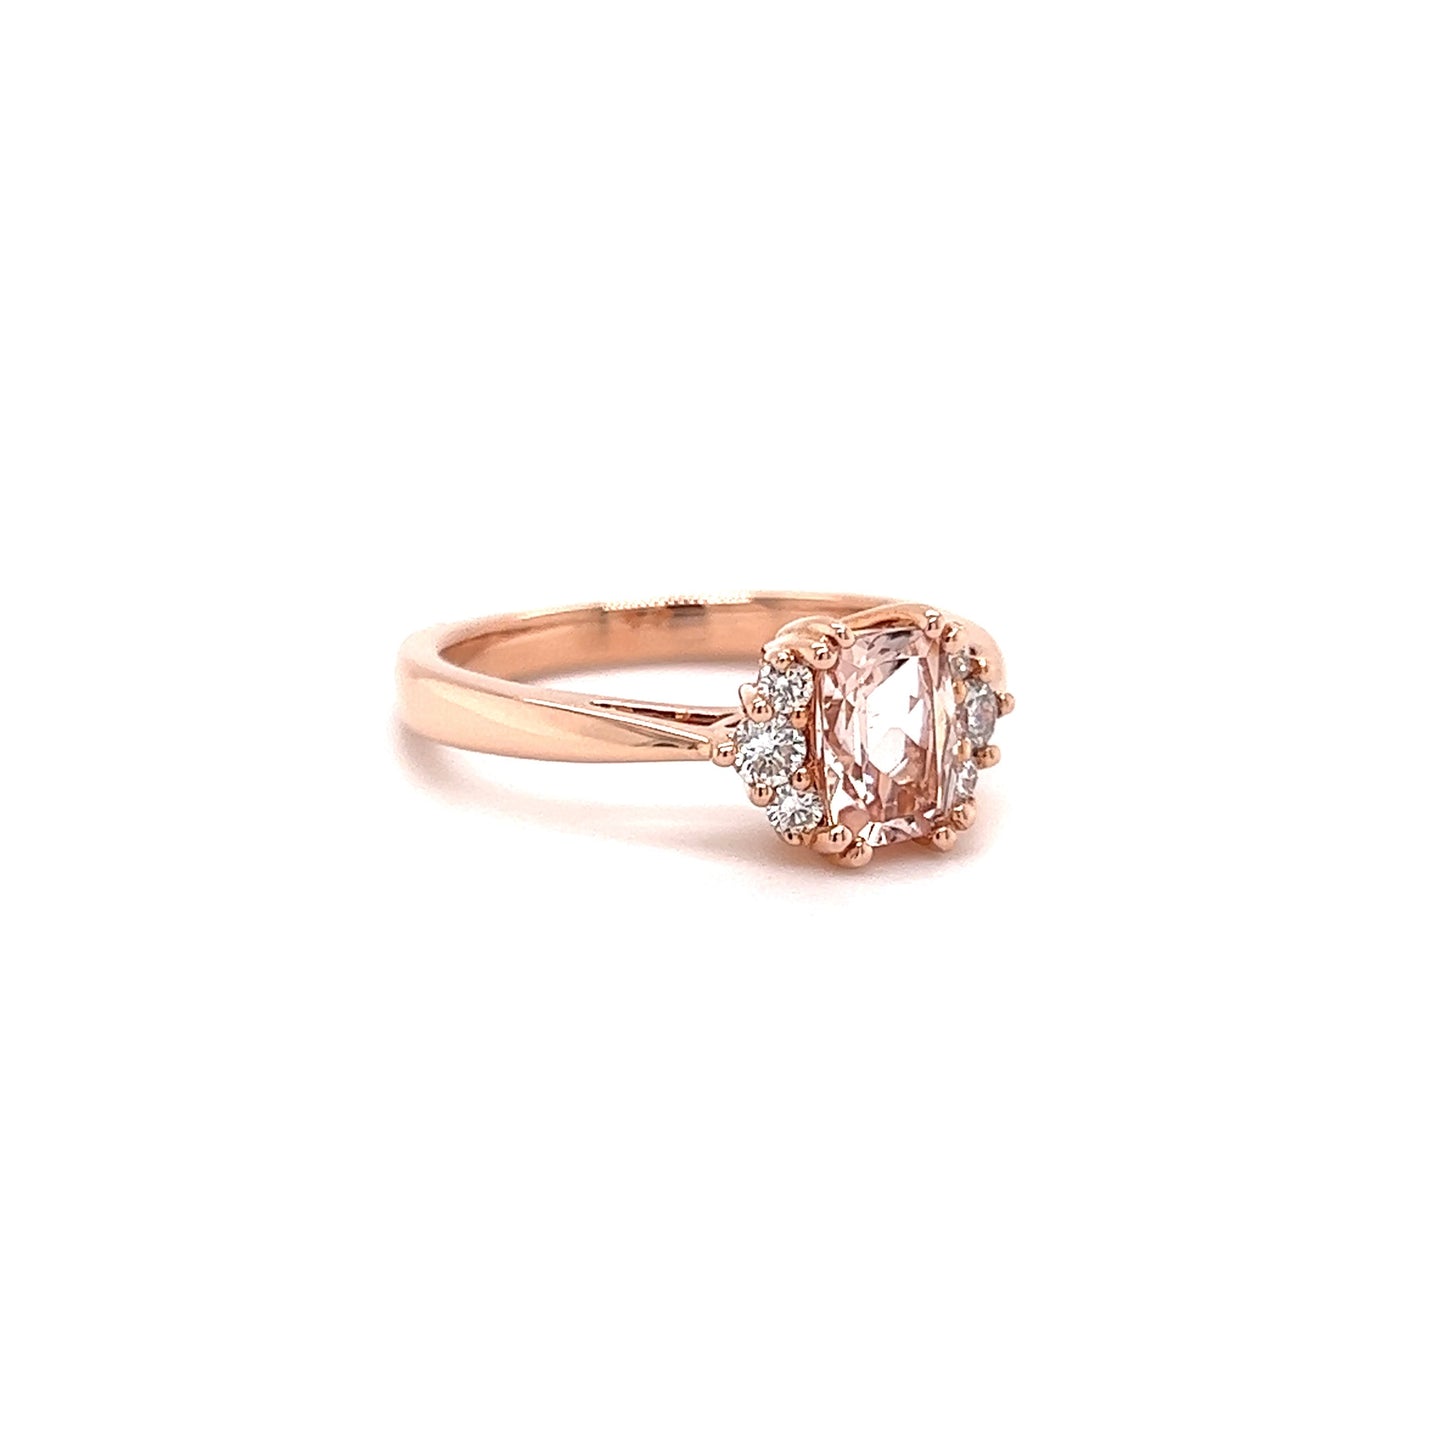 Elongated Cushion Morganite Ring with Six Side Diamonds in 14K Rose Gold Left Side View